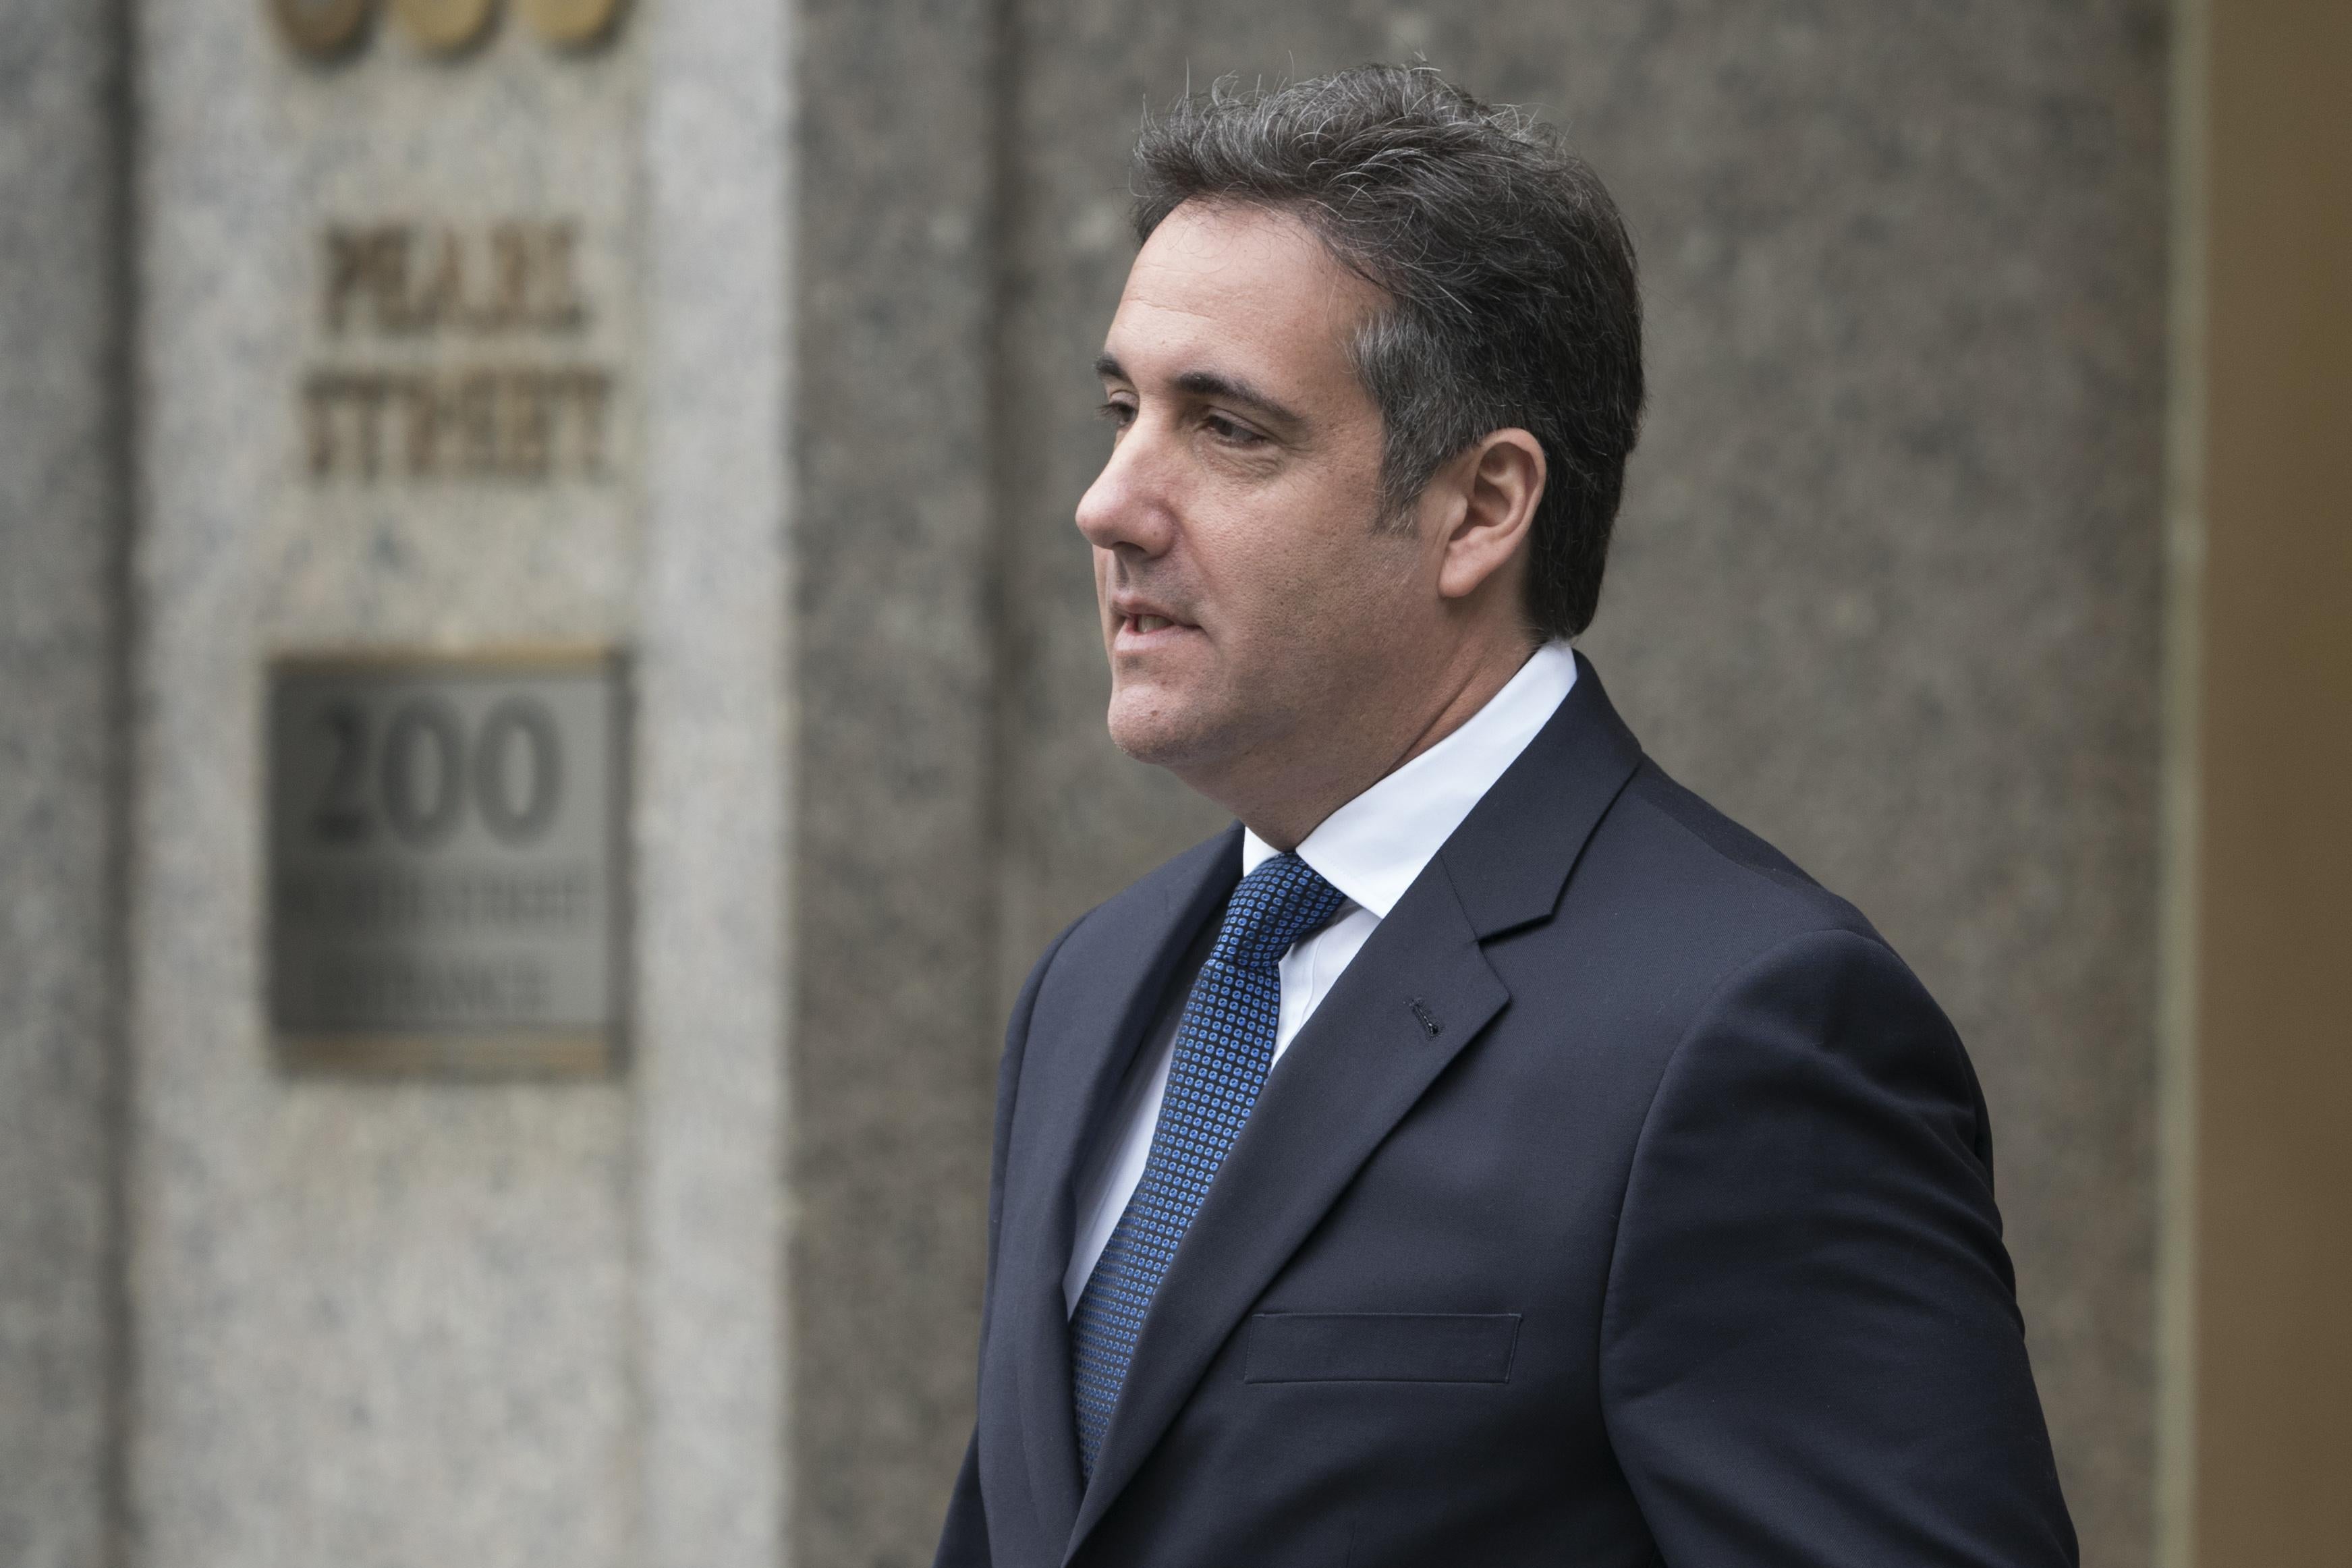 Michael Cohen leaves the United States District Court Southern District of New York on May 30, 2018 in New York City.